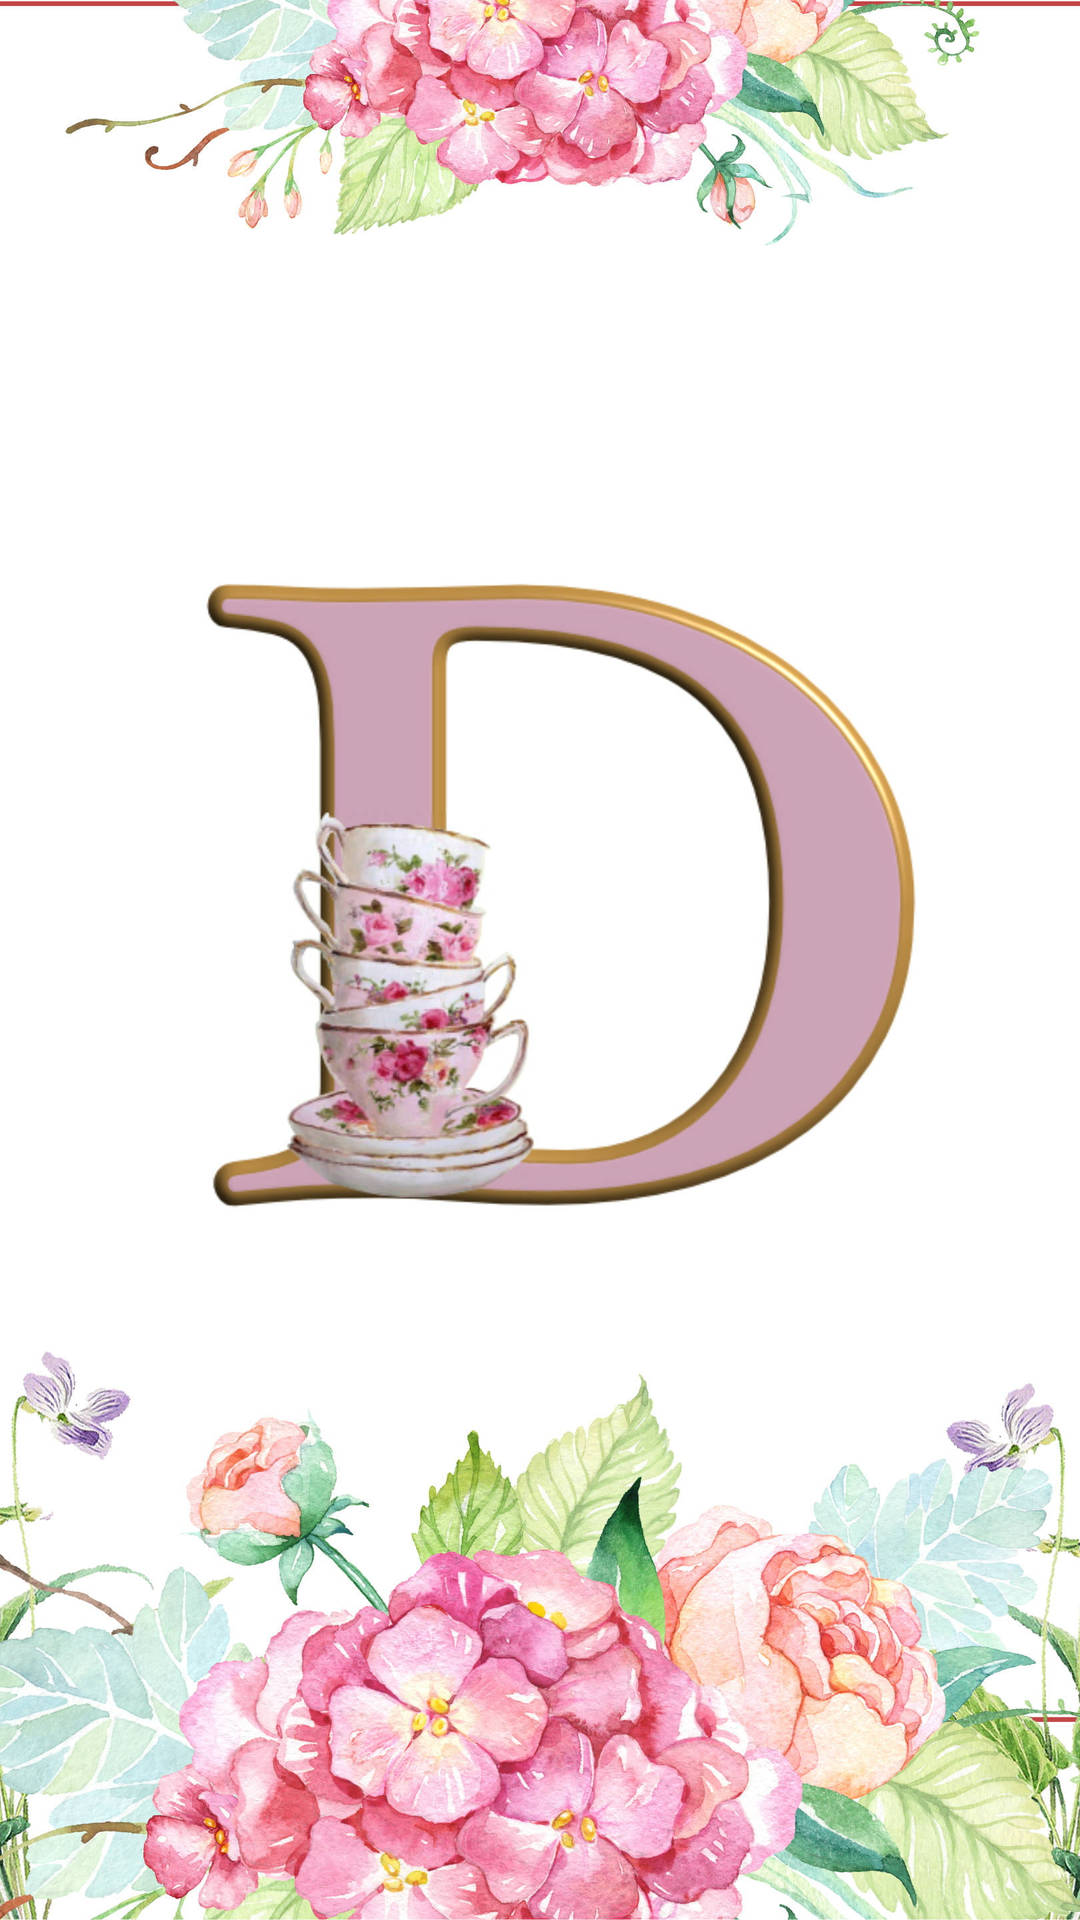 Letter D With Teacups Background